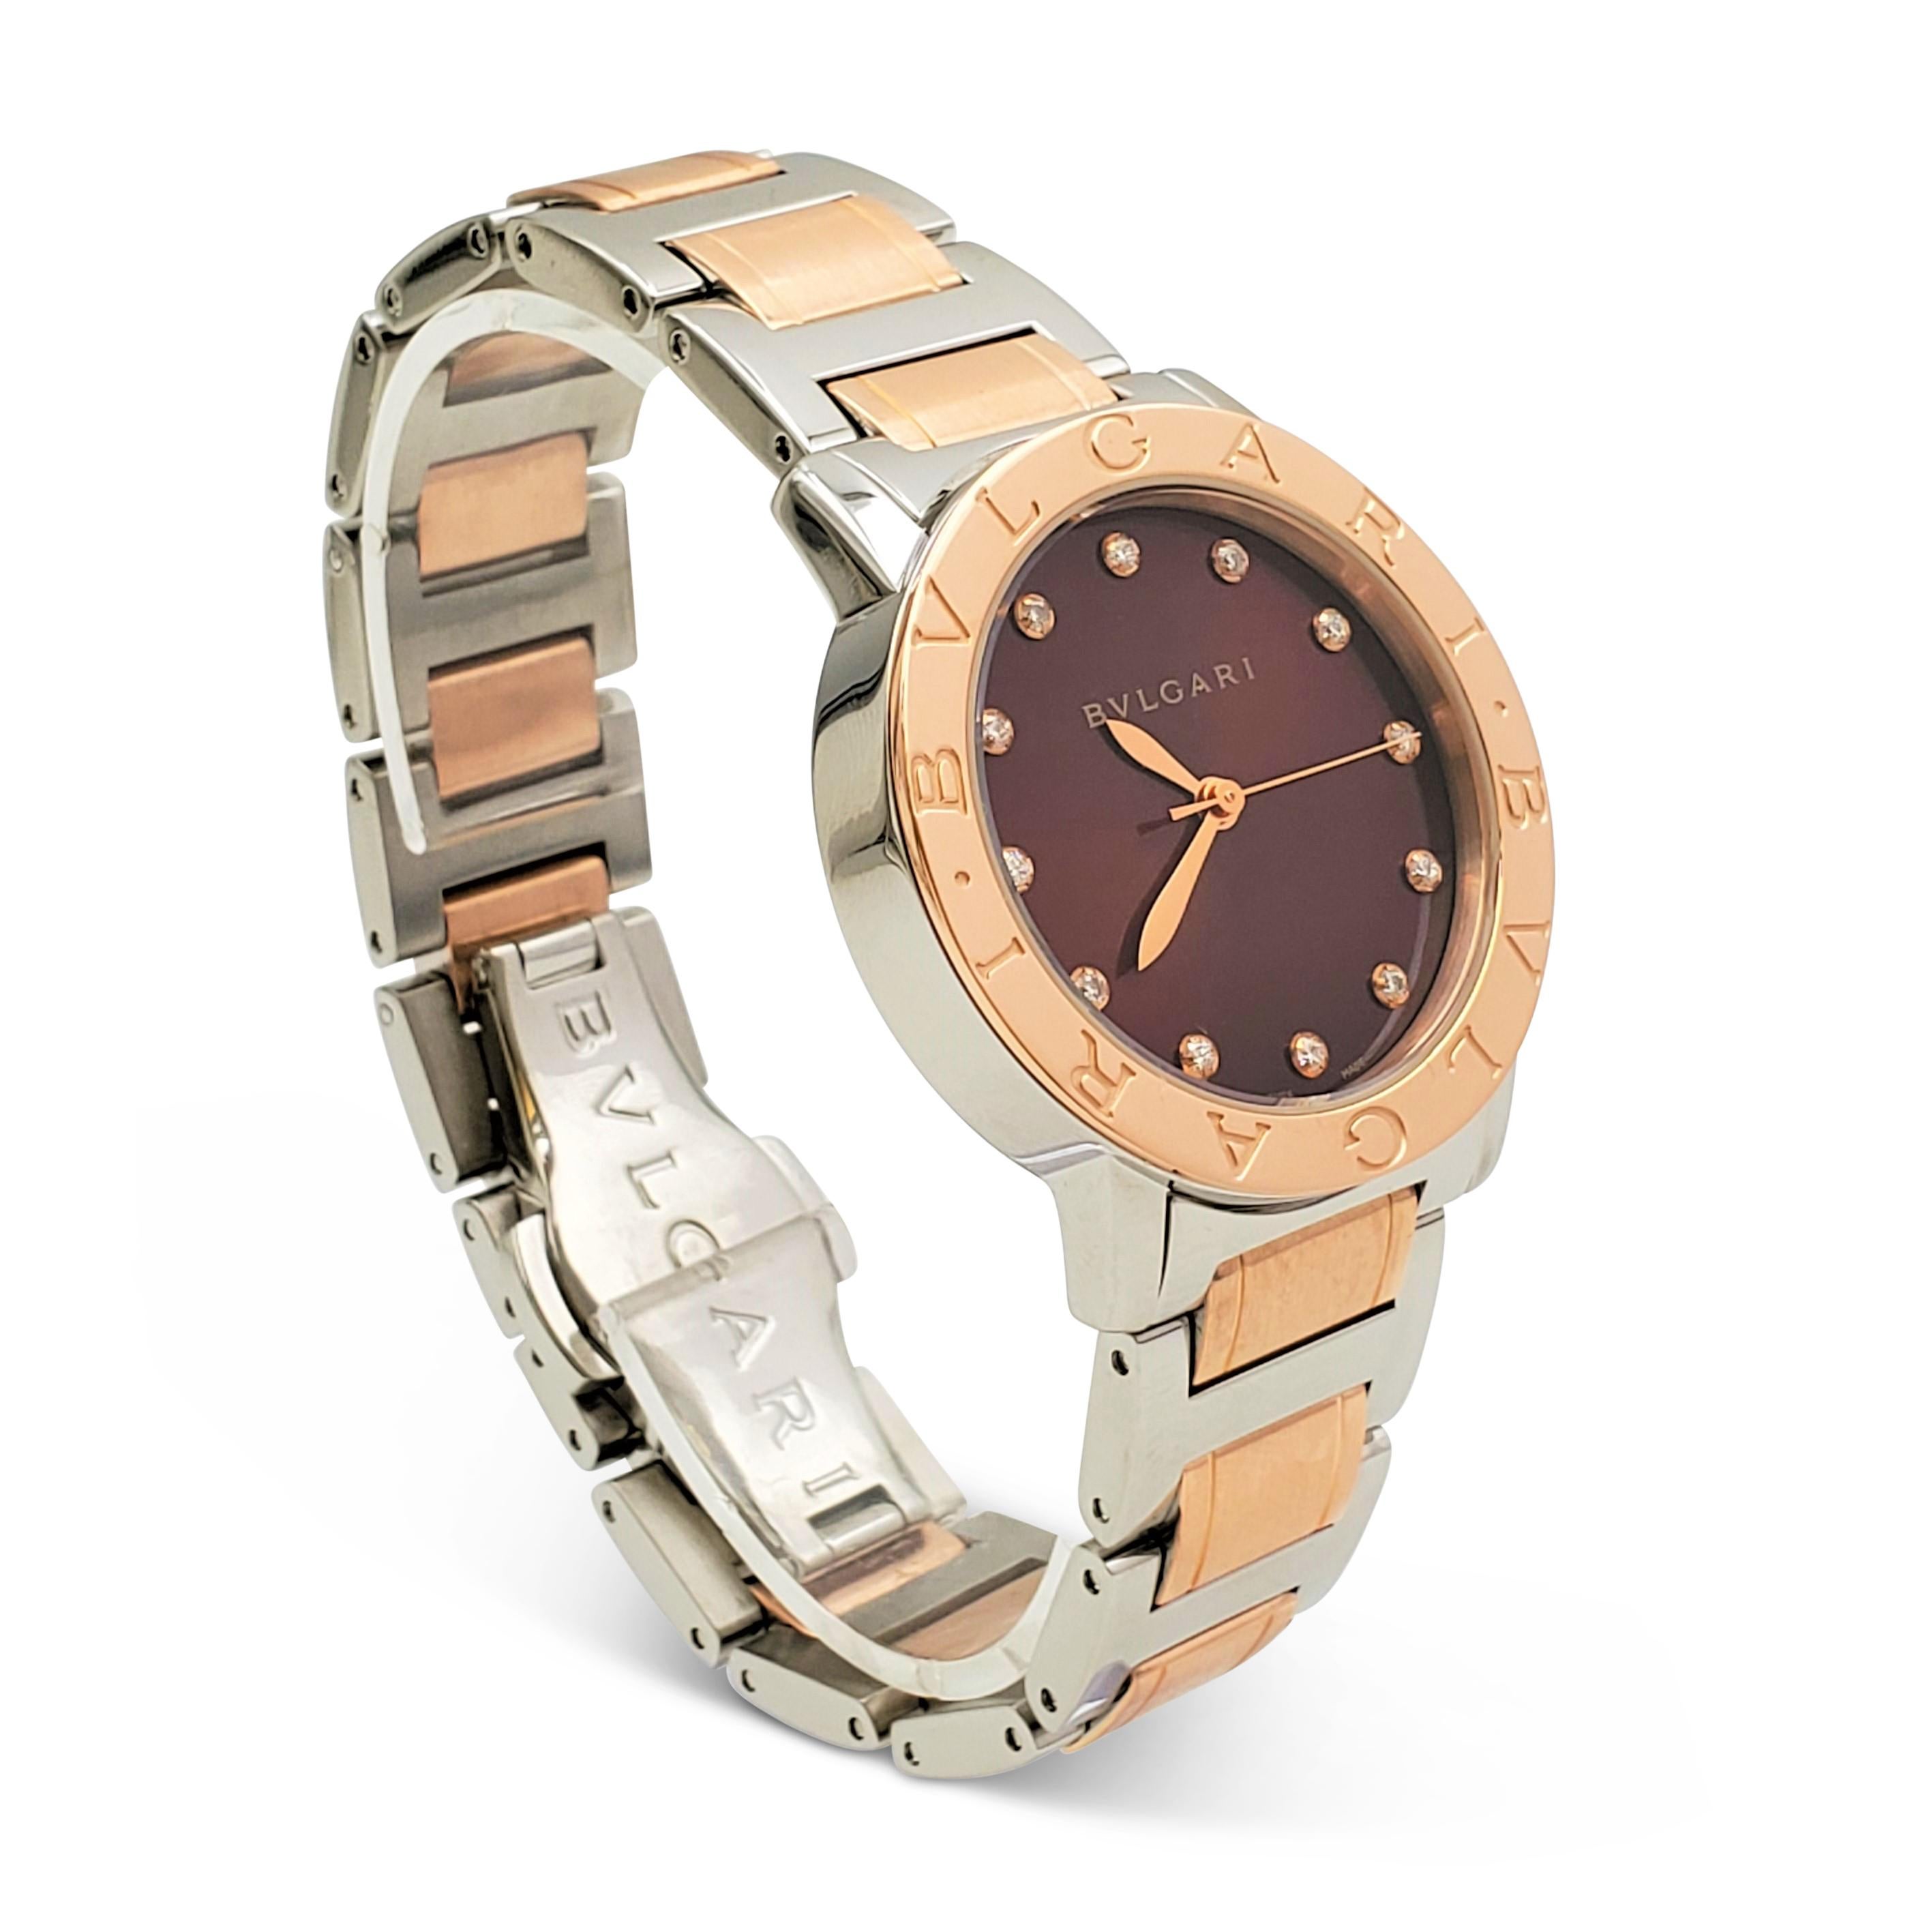 Authentic Bvlgari watch features a stainless steel case with two-tone stainless steel and 18 karat rose gold bracelet. The fixed rose gold bezel is engraved with the iconic BVLGARI-BVLGARI logo. The brown lacquered dial is completed with rose